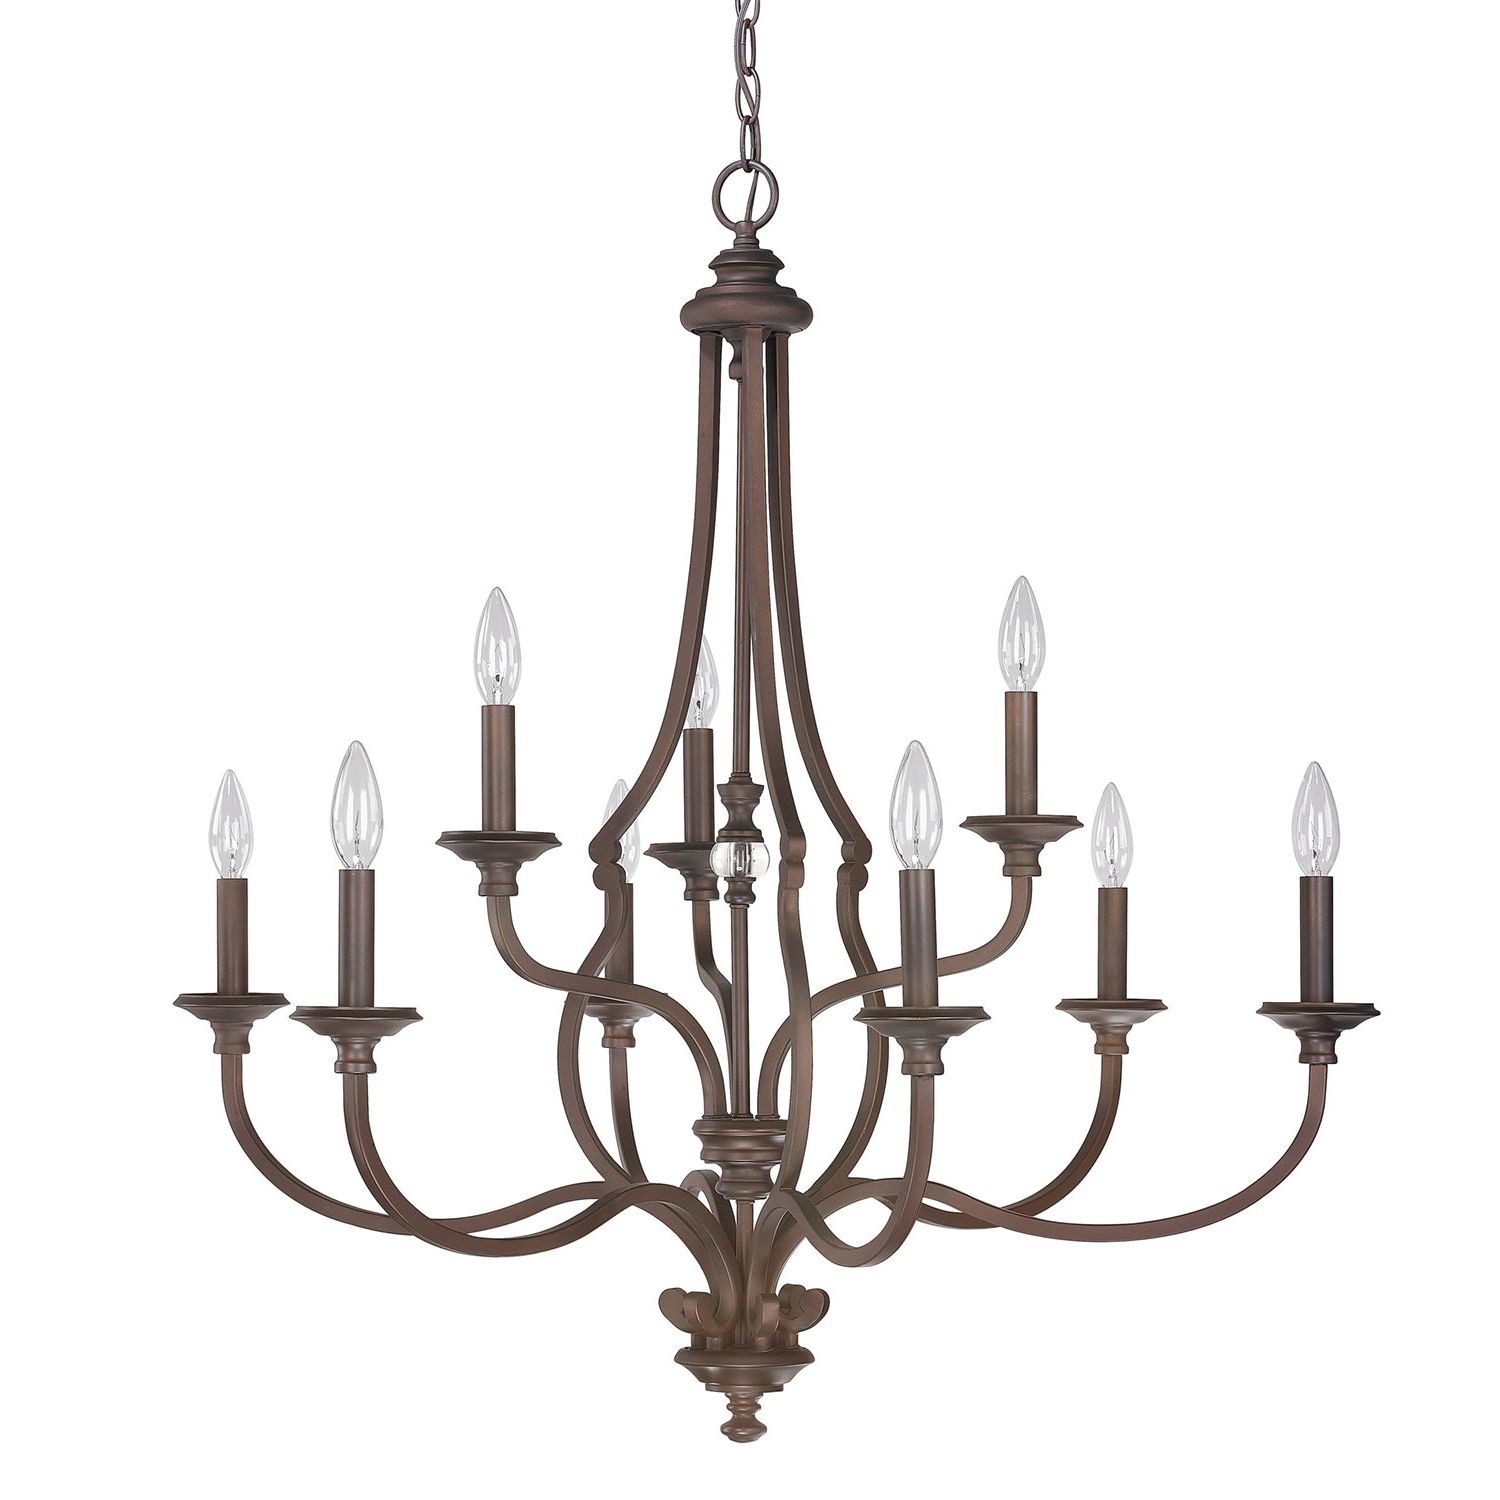 Favorite Gaines 9 Light Candle Style Chandeliers Pertaining To Darby Home Co Jaclyn 9 Light Candle Style Chandelier (View 6 of 20)